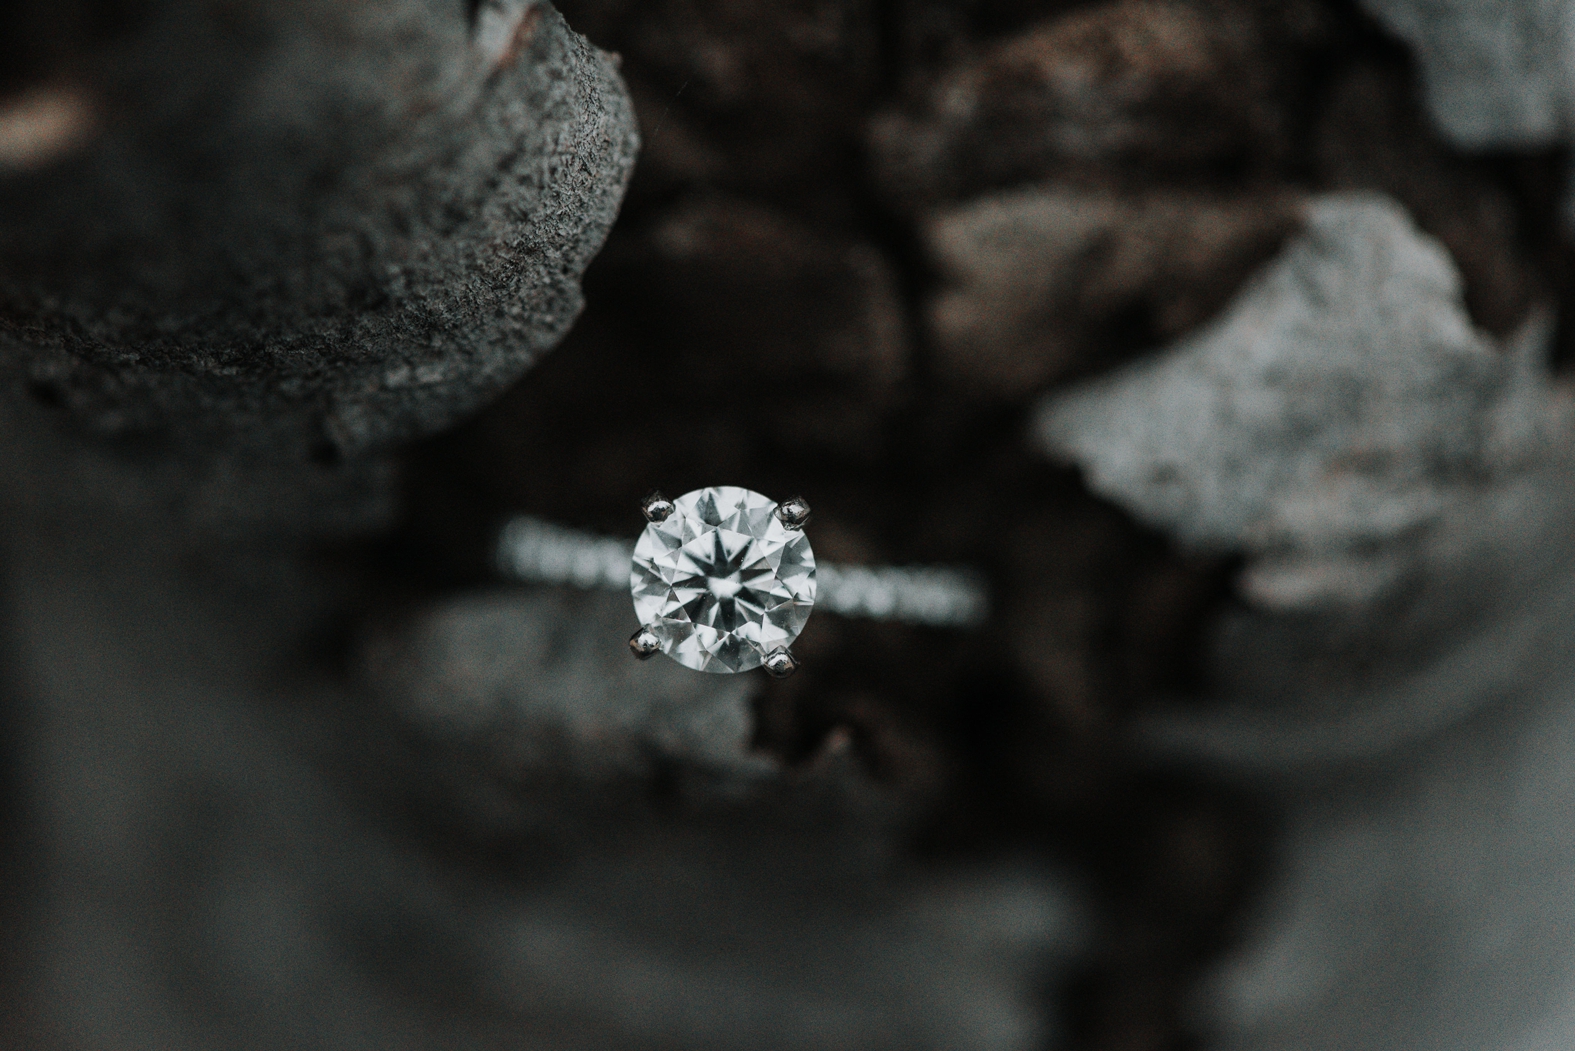 Close up shot of a solitaire engagement ring set inside dark rocks in downtown St. Louis.